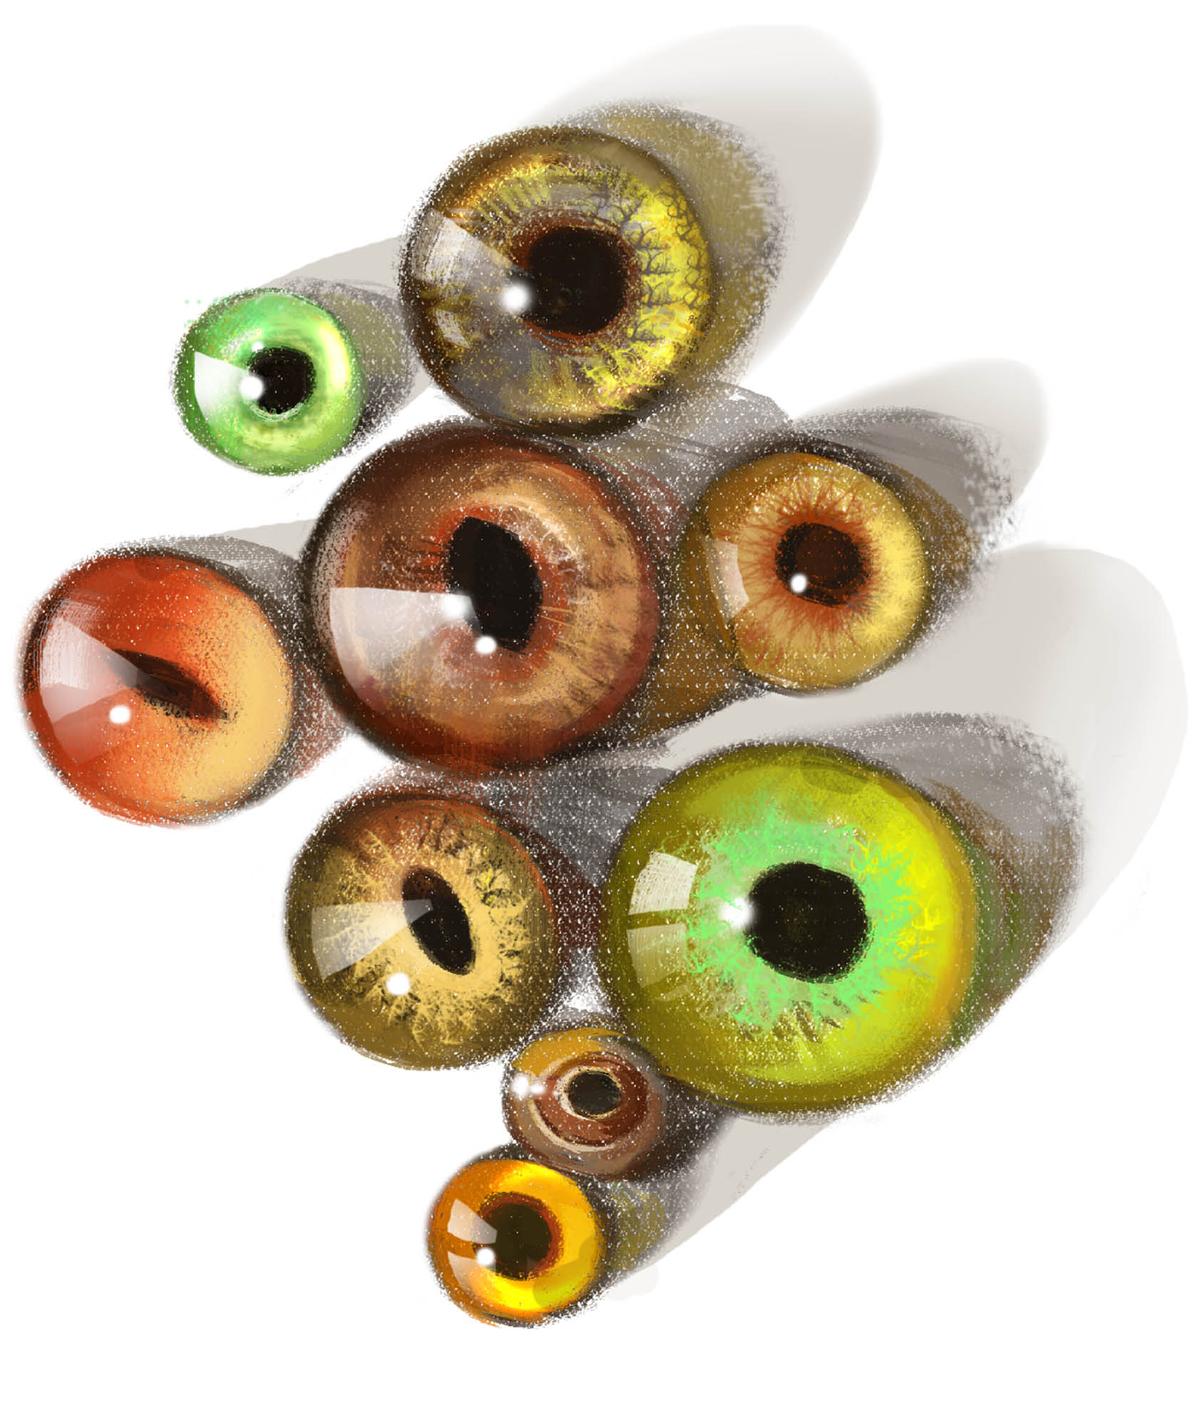 Tohickon Glass Eyes produces anything from deer eyes to bird, fish, and crocodile eyes, in its small Pennsylvania factory.